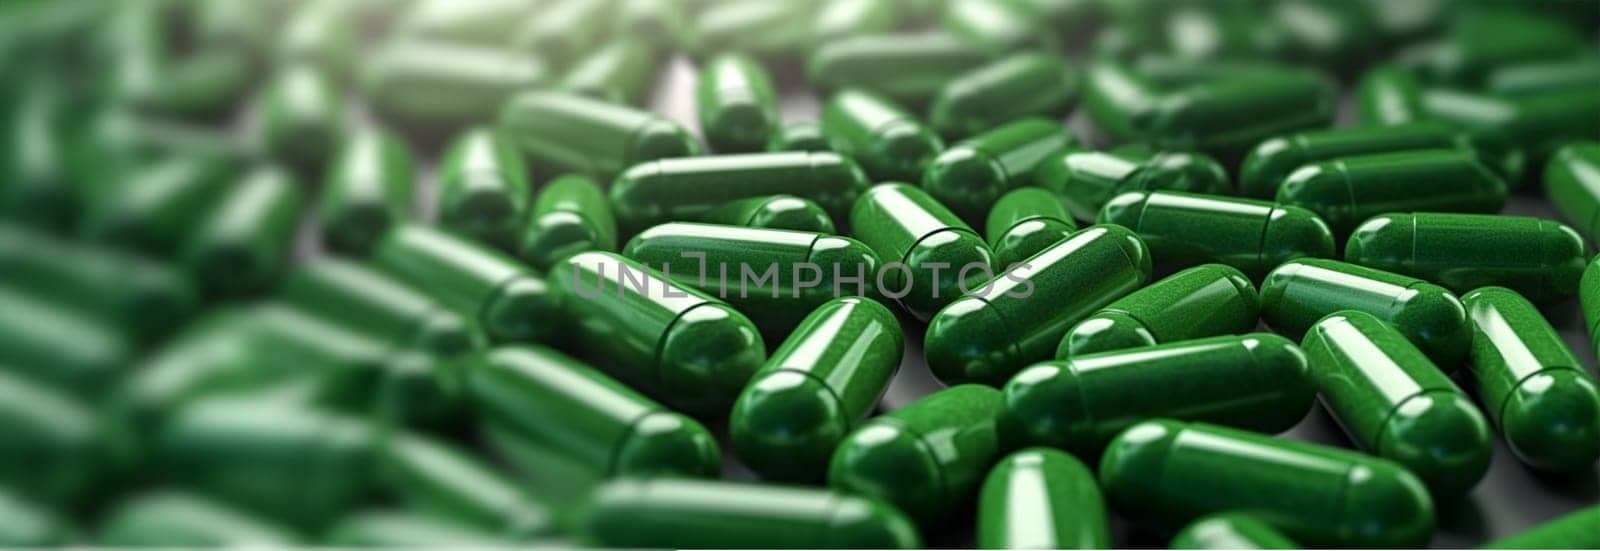 Alternative medicine herbal organic capsule with vitamin E omega 3 fish oil, mineral, drug with herbs leaf natural supplements for healthy good life. Herbal medicine in capsules. Nature medication green supplement